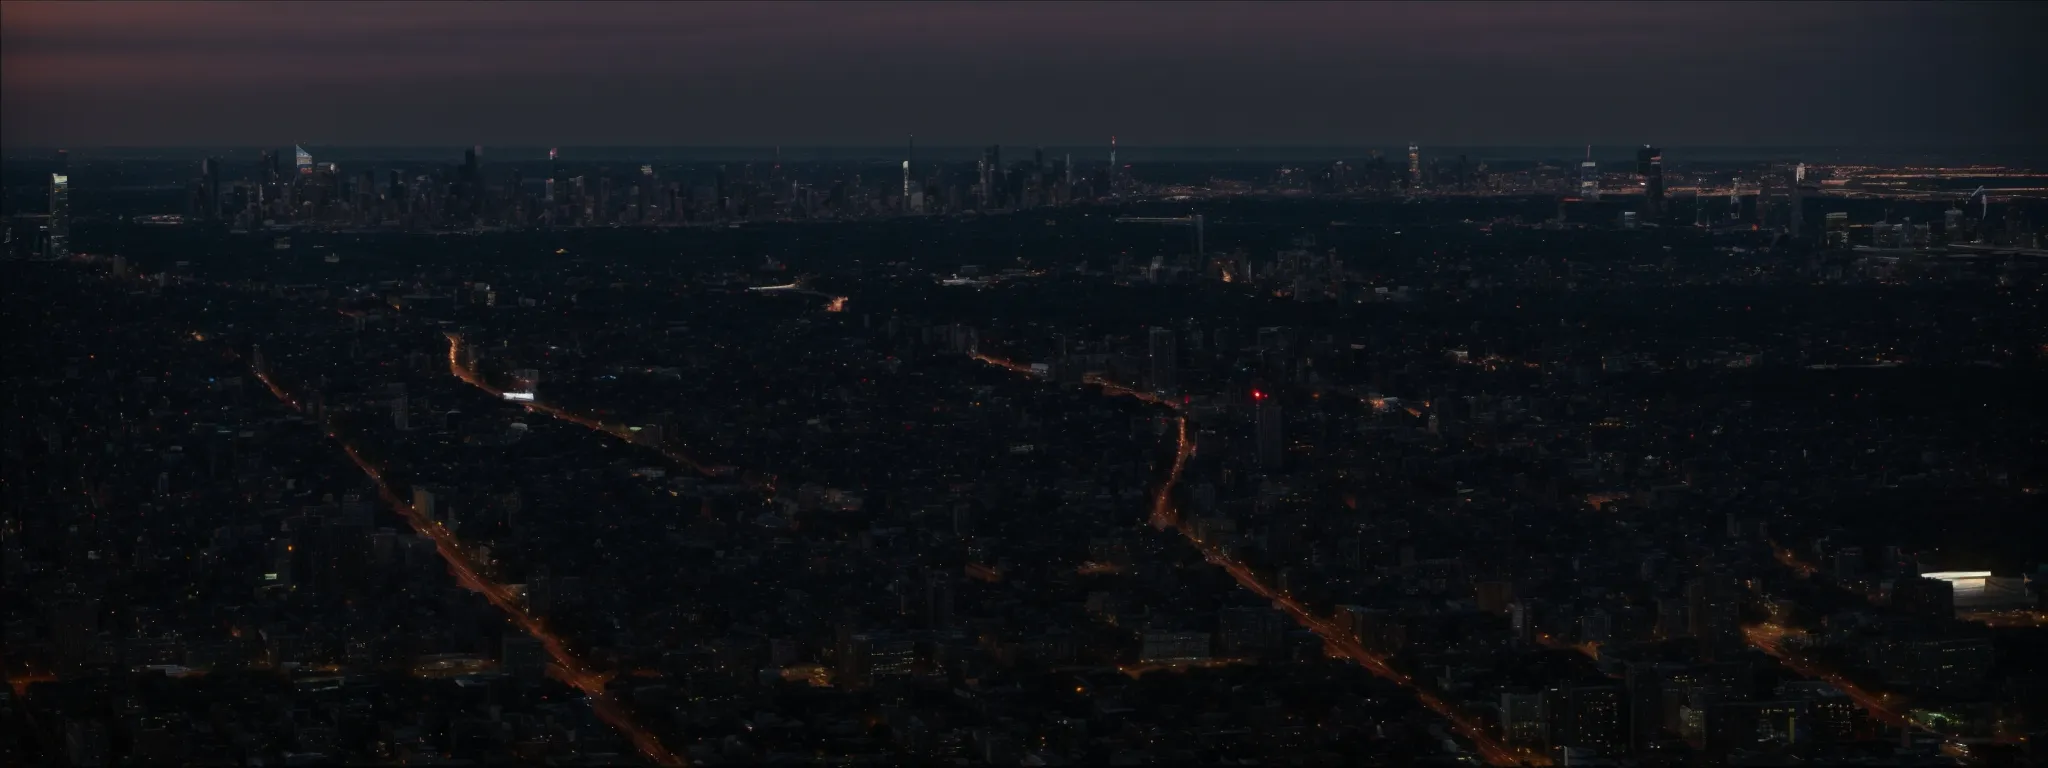 a skyline view of new jersey's cityscape at dusk, highlighting the bustling digital economy.